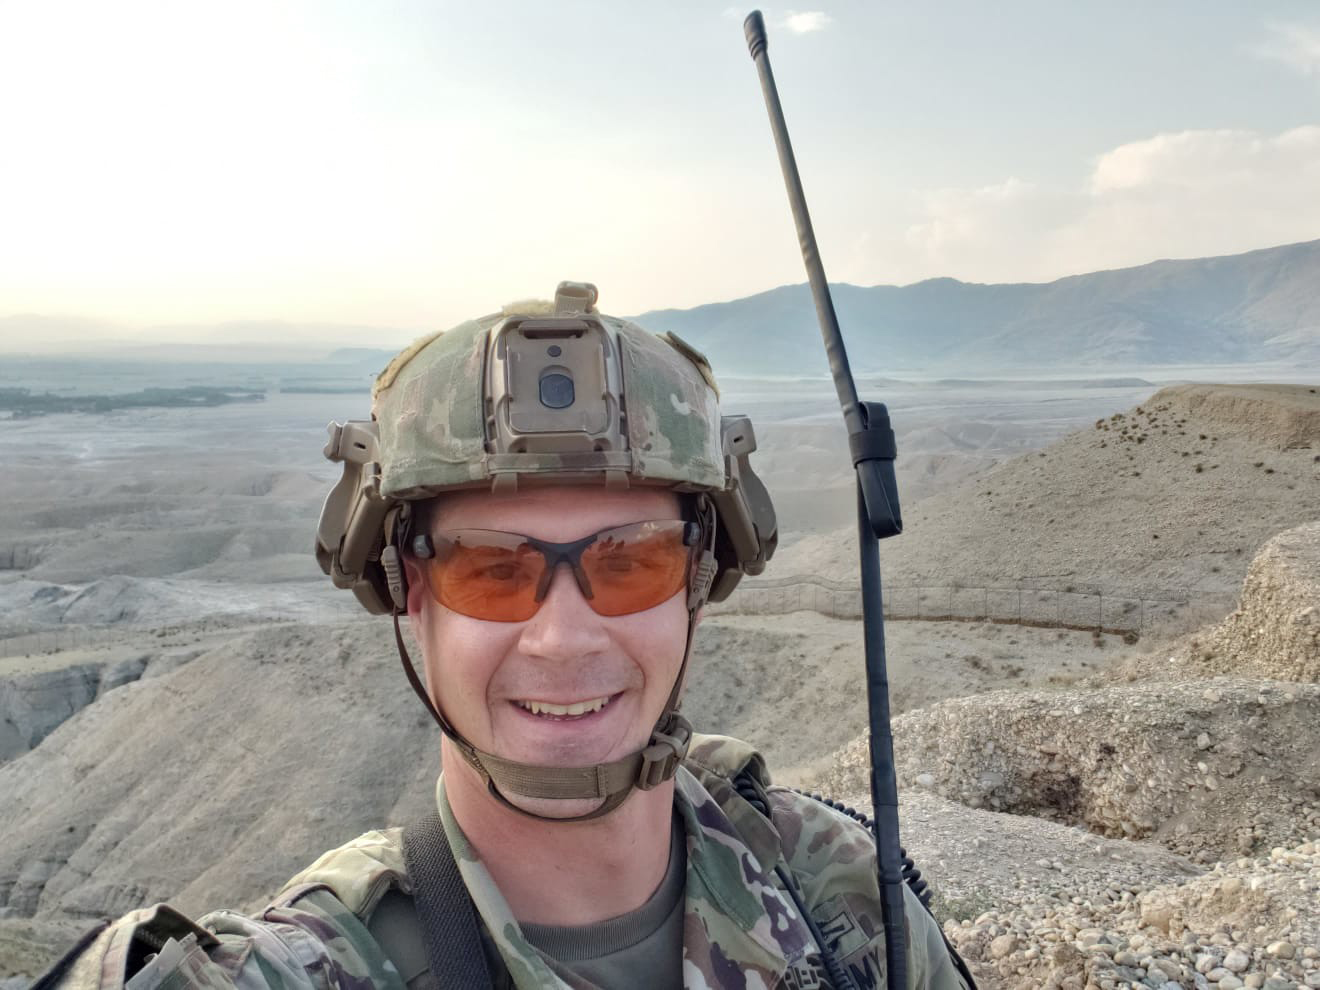 Staff Sgt. Benjamin Sieg, a quick reaction force squad leader in A Company, 1st Battalion, 128th Infantry, in Afghanistan. The 1st Battalion, 128th Infantry, deployed to Afghanistan in July 2019, and is acting as a “Guardian Angel” security element for the 3rd Security Force Assistance Brigade. (Photo by Courtesy)